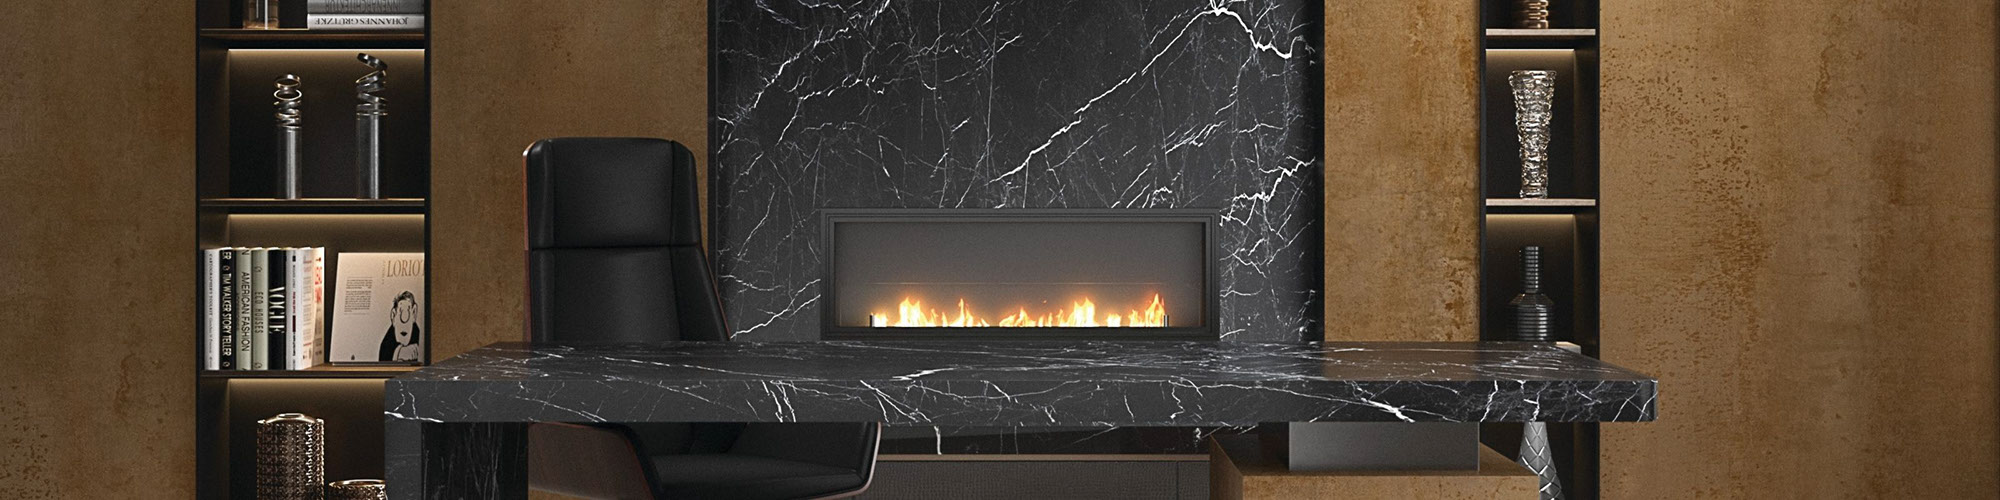 Home office with bookshelves of metallic looking porcelain slab and fireplace surround of black marble look porcelain slab, and desk made of porcelain slab that looks like black marble.